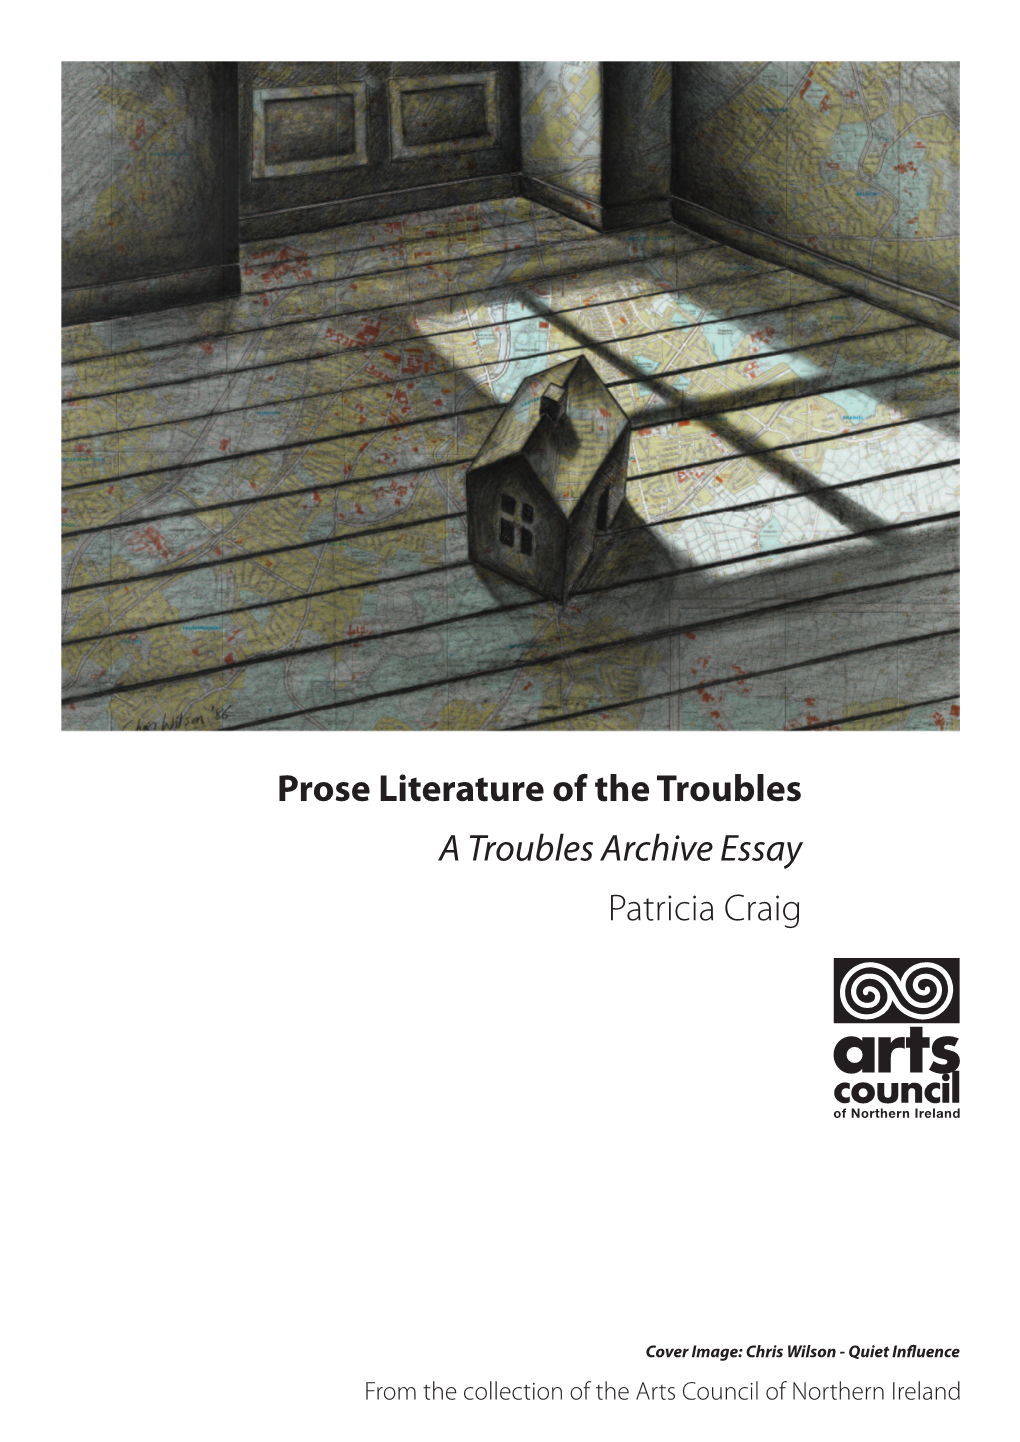 Prose Literature of the Troubles Patricia Craig a Troubles Archive